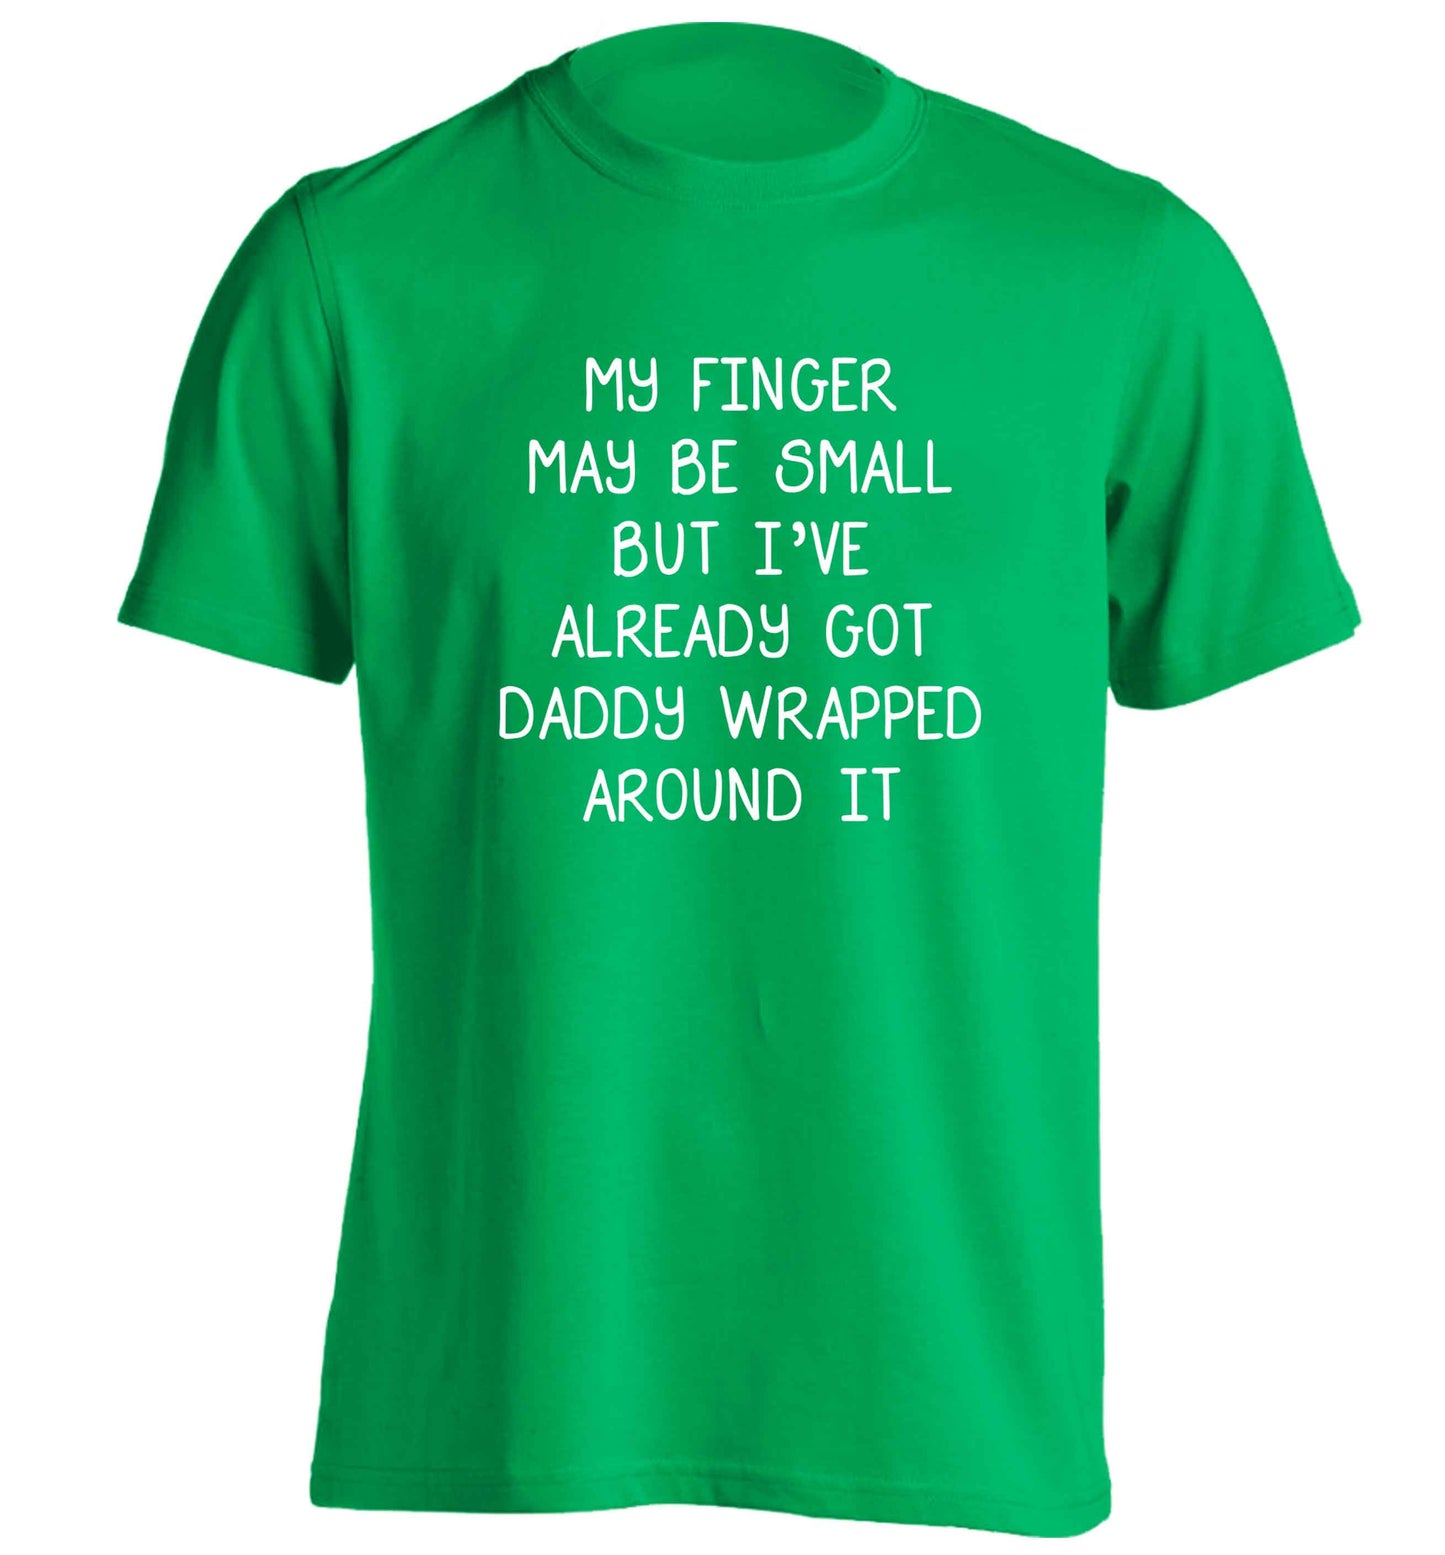 My finger may be small but I've already got daddy wrapped around it adults unisex green Tshirt 2XL